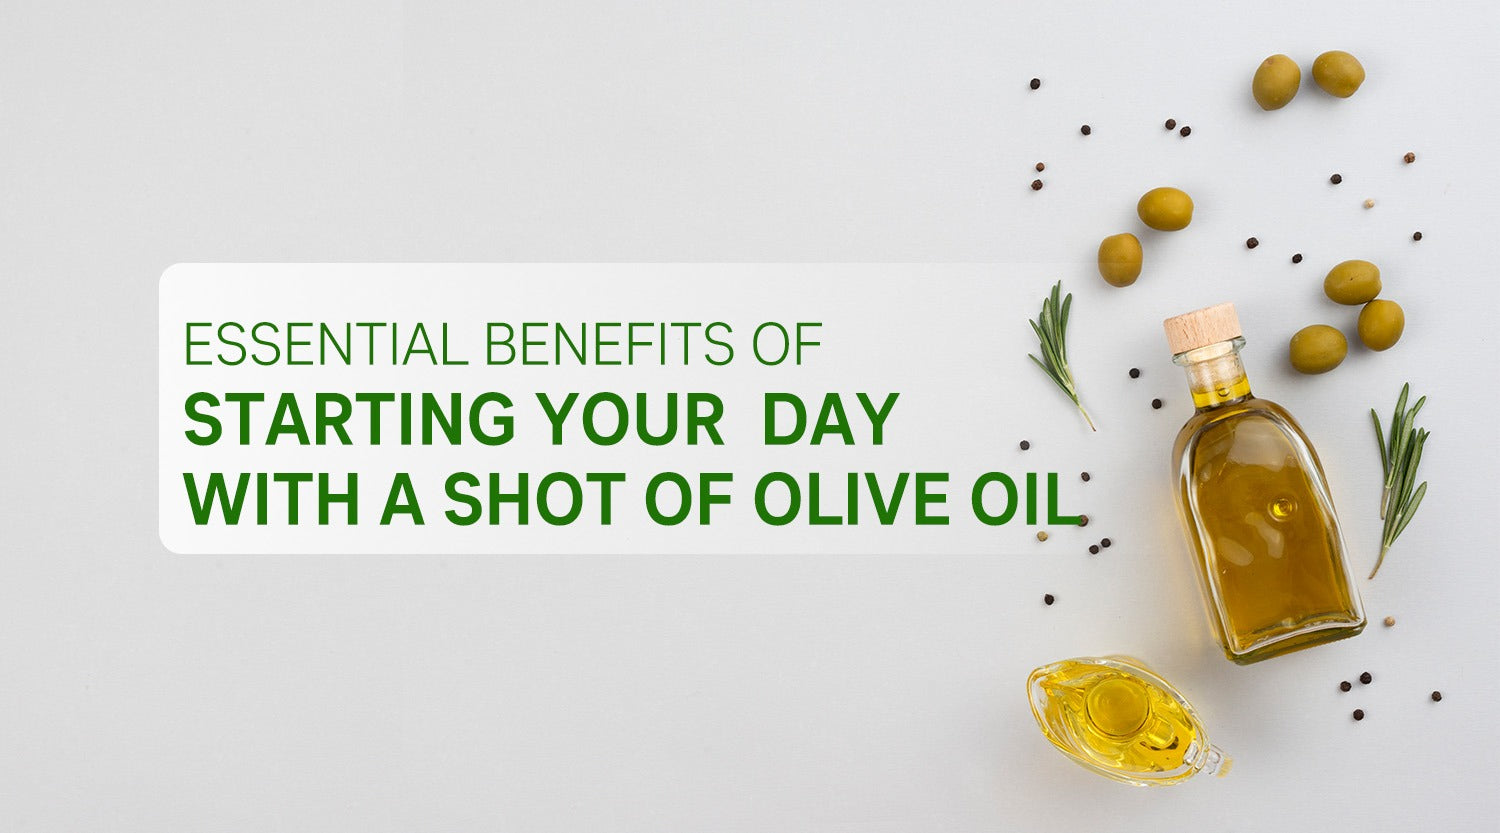 Essential Benefits of Starting Your Day with a Shot of Olive Oil